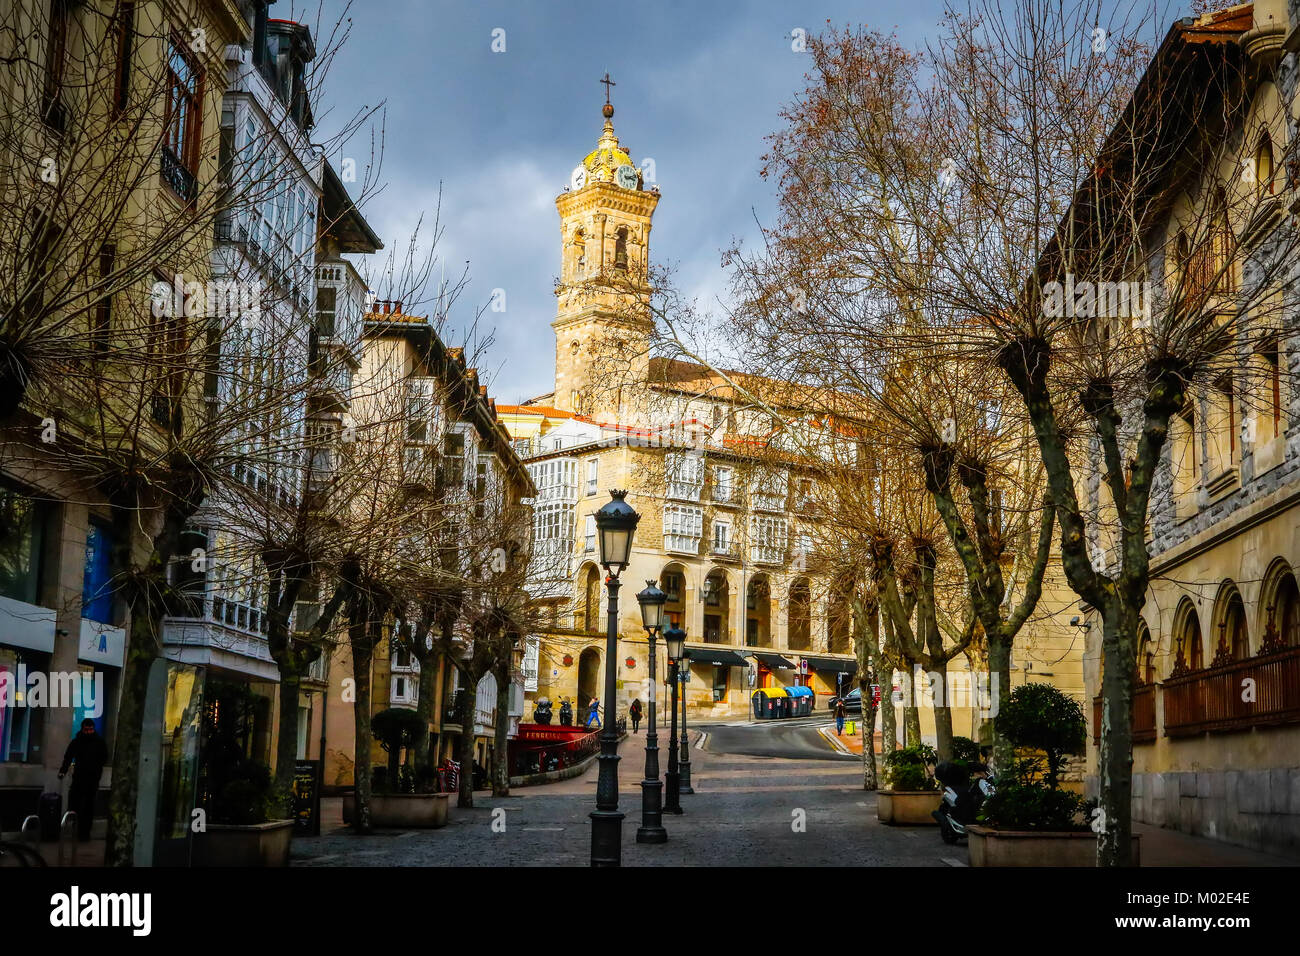 Vitoria, Spain - January 12, 2018: City view in central street of Vitoria. Vitoria-Gasteiz is the capital of the Autonomous Community of the Basque Co Stock Photo